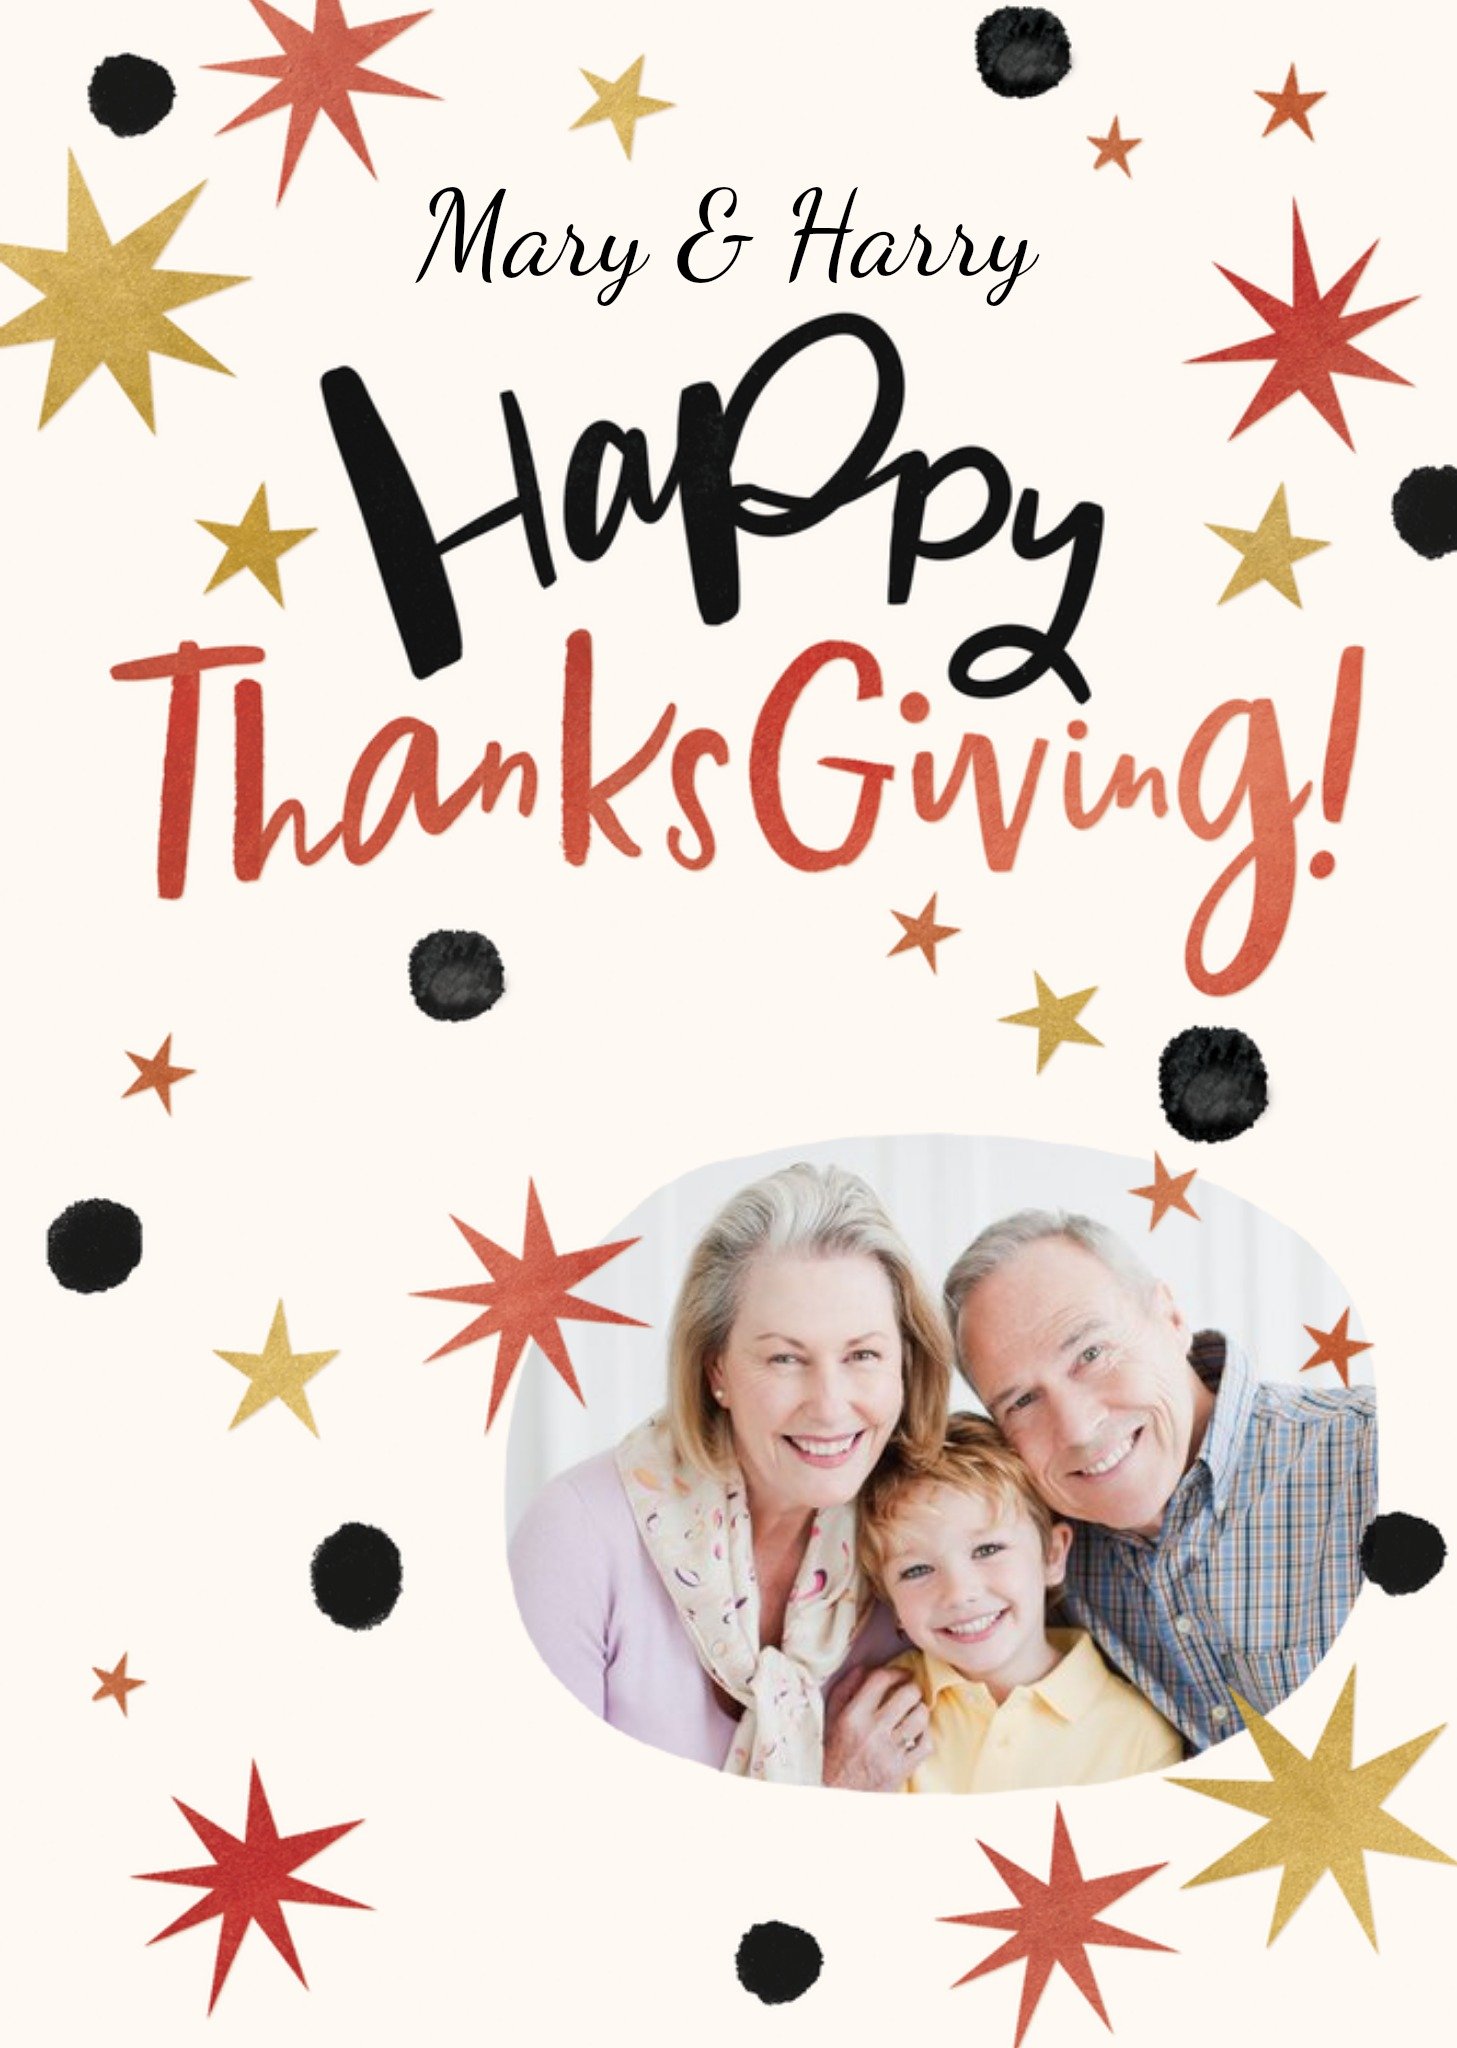 Moonpig Happy Thanksgiving Decorated With A Funky Star Burst Pattern Photo Upload Card Ecard